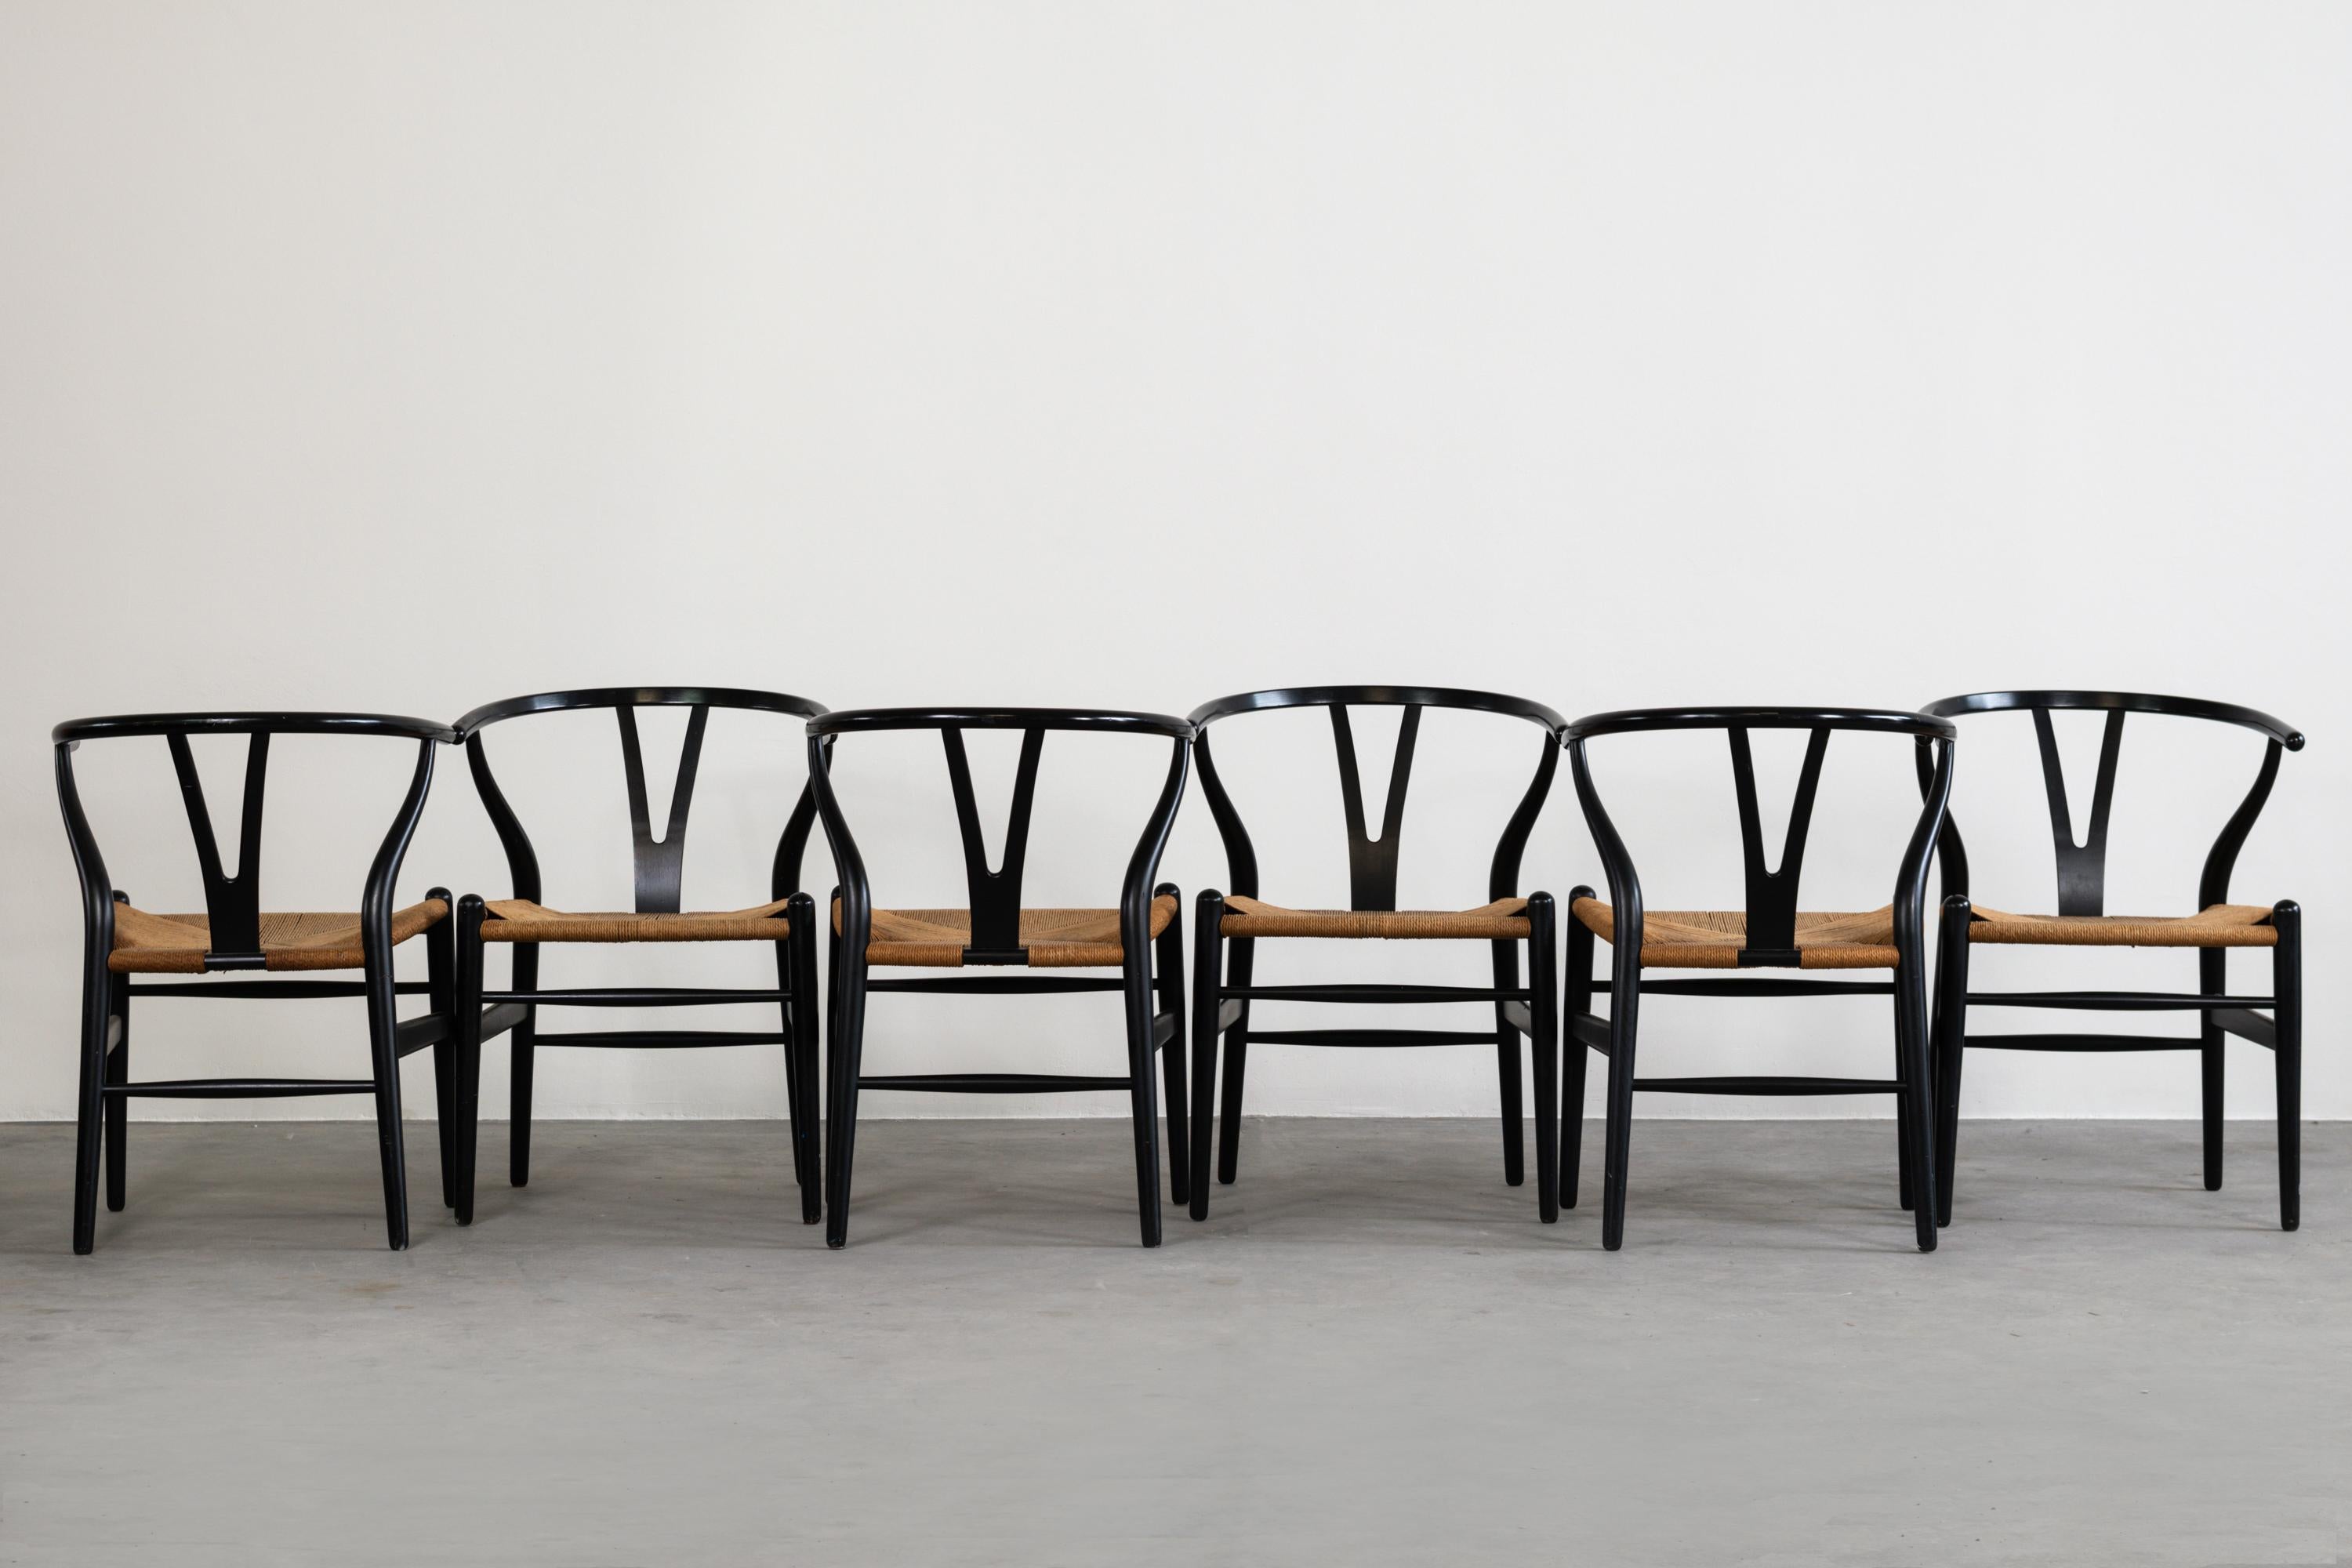 Set of six chairs 'CH24' by Hans Jorgen Wegner, in solid black lacquered wood with woven rope seat.
Embossed with the manufacturer's name.
Production Carl Hansen & Son, Denmark, circa 1960.